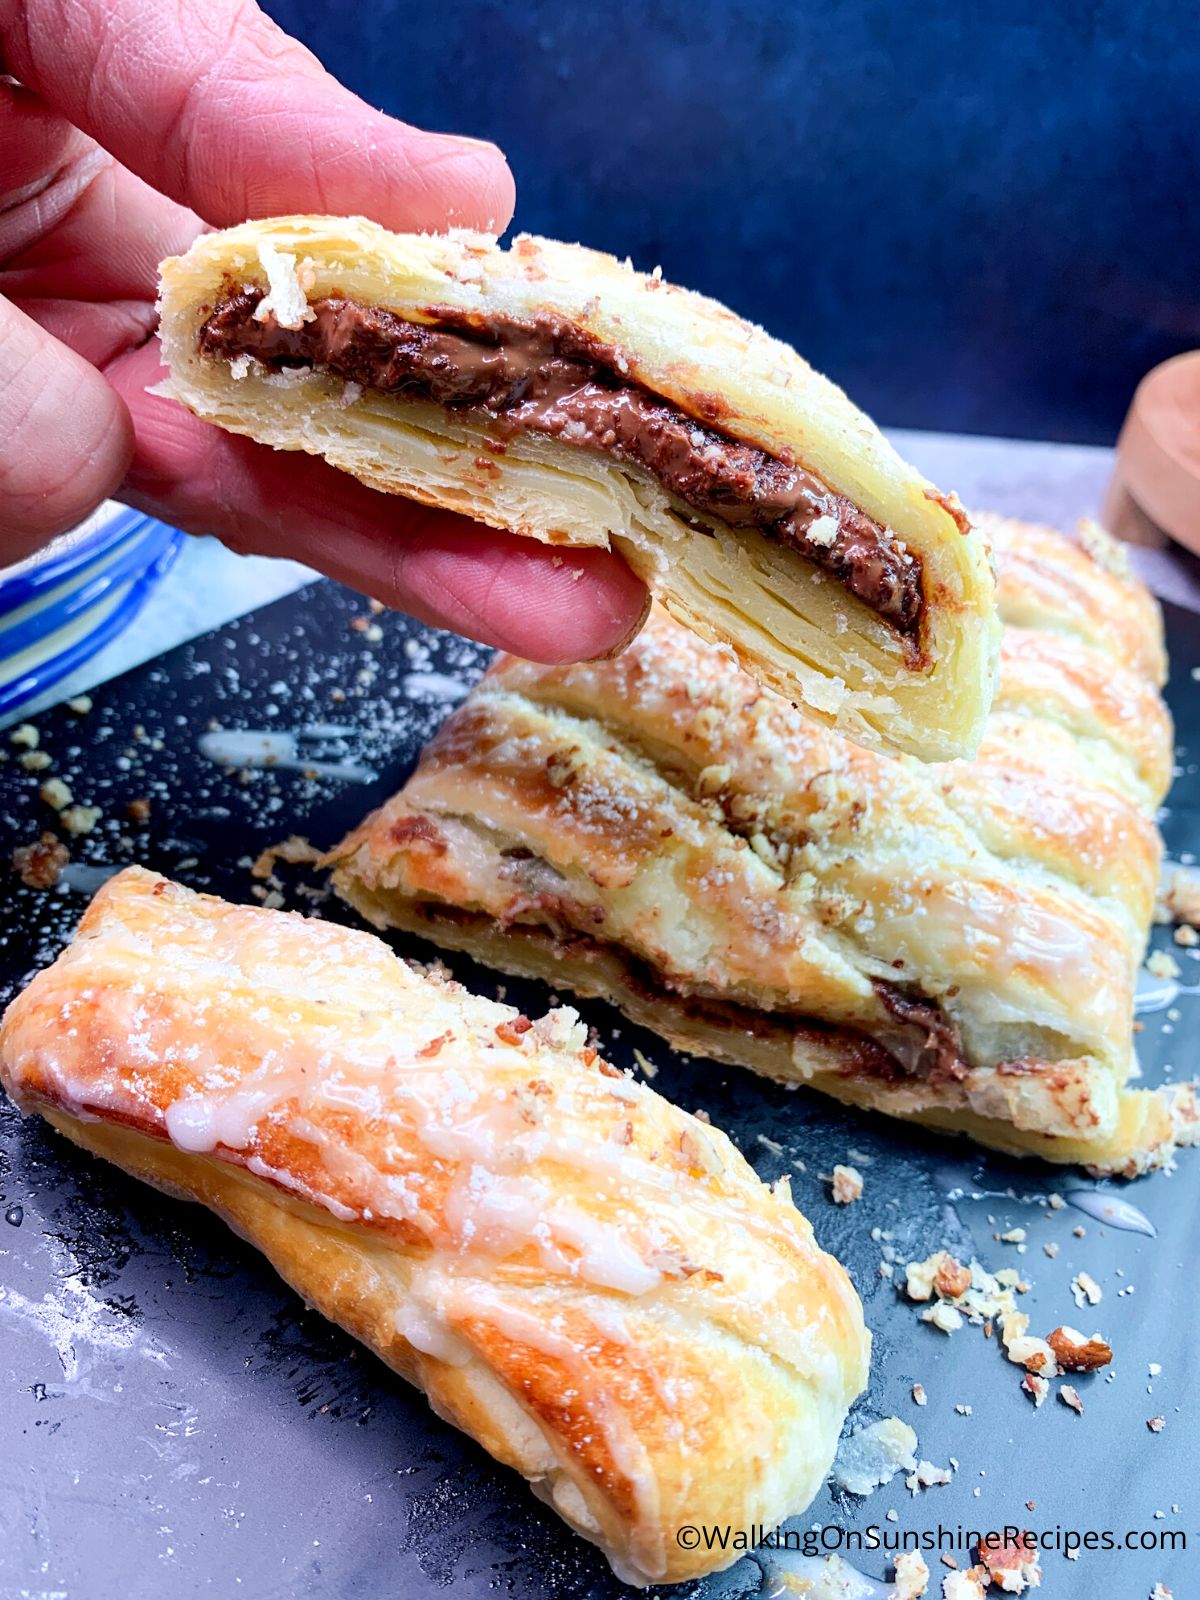 Closeup of chocolate puff pastry sliced and held in hand.